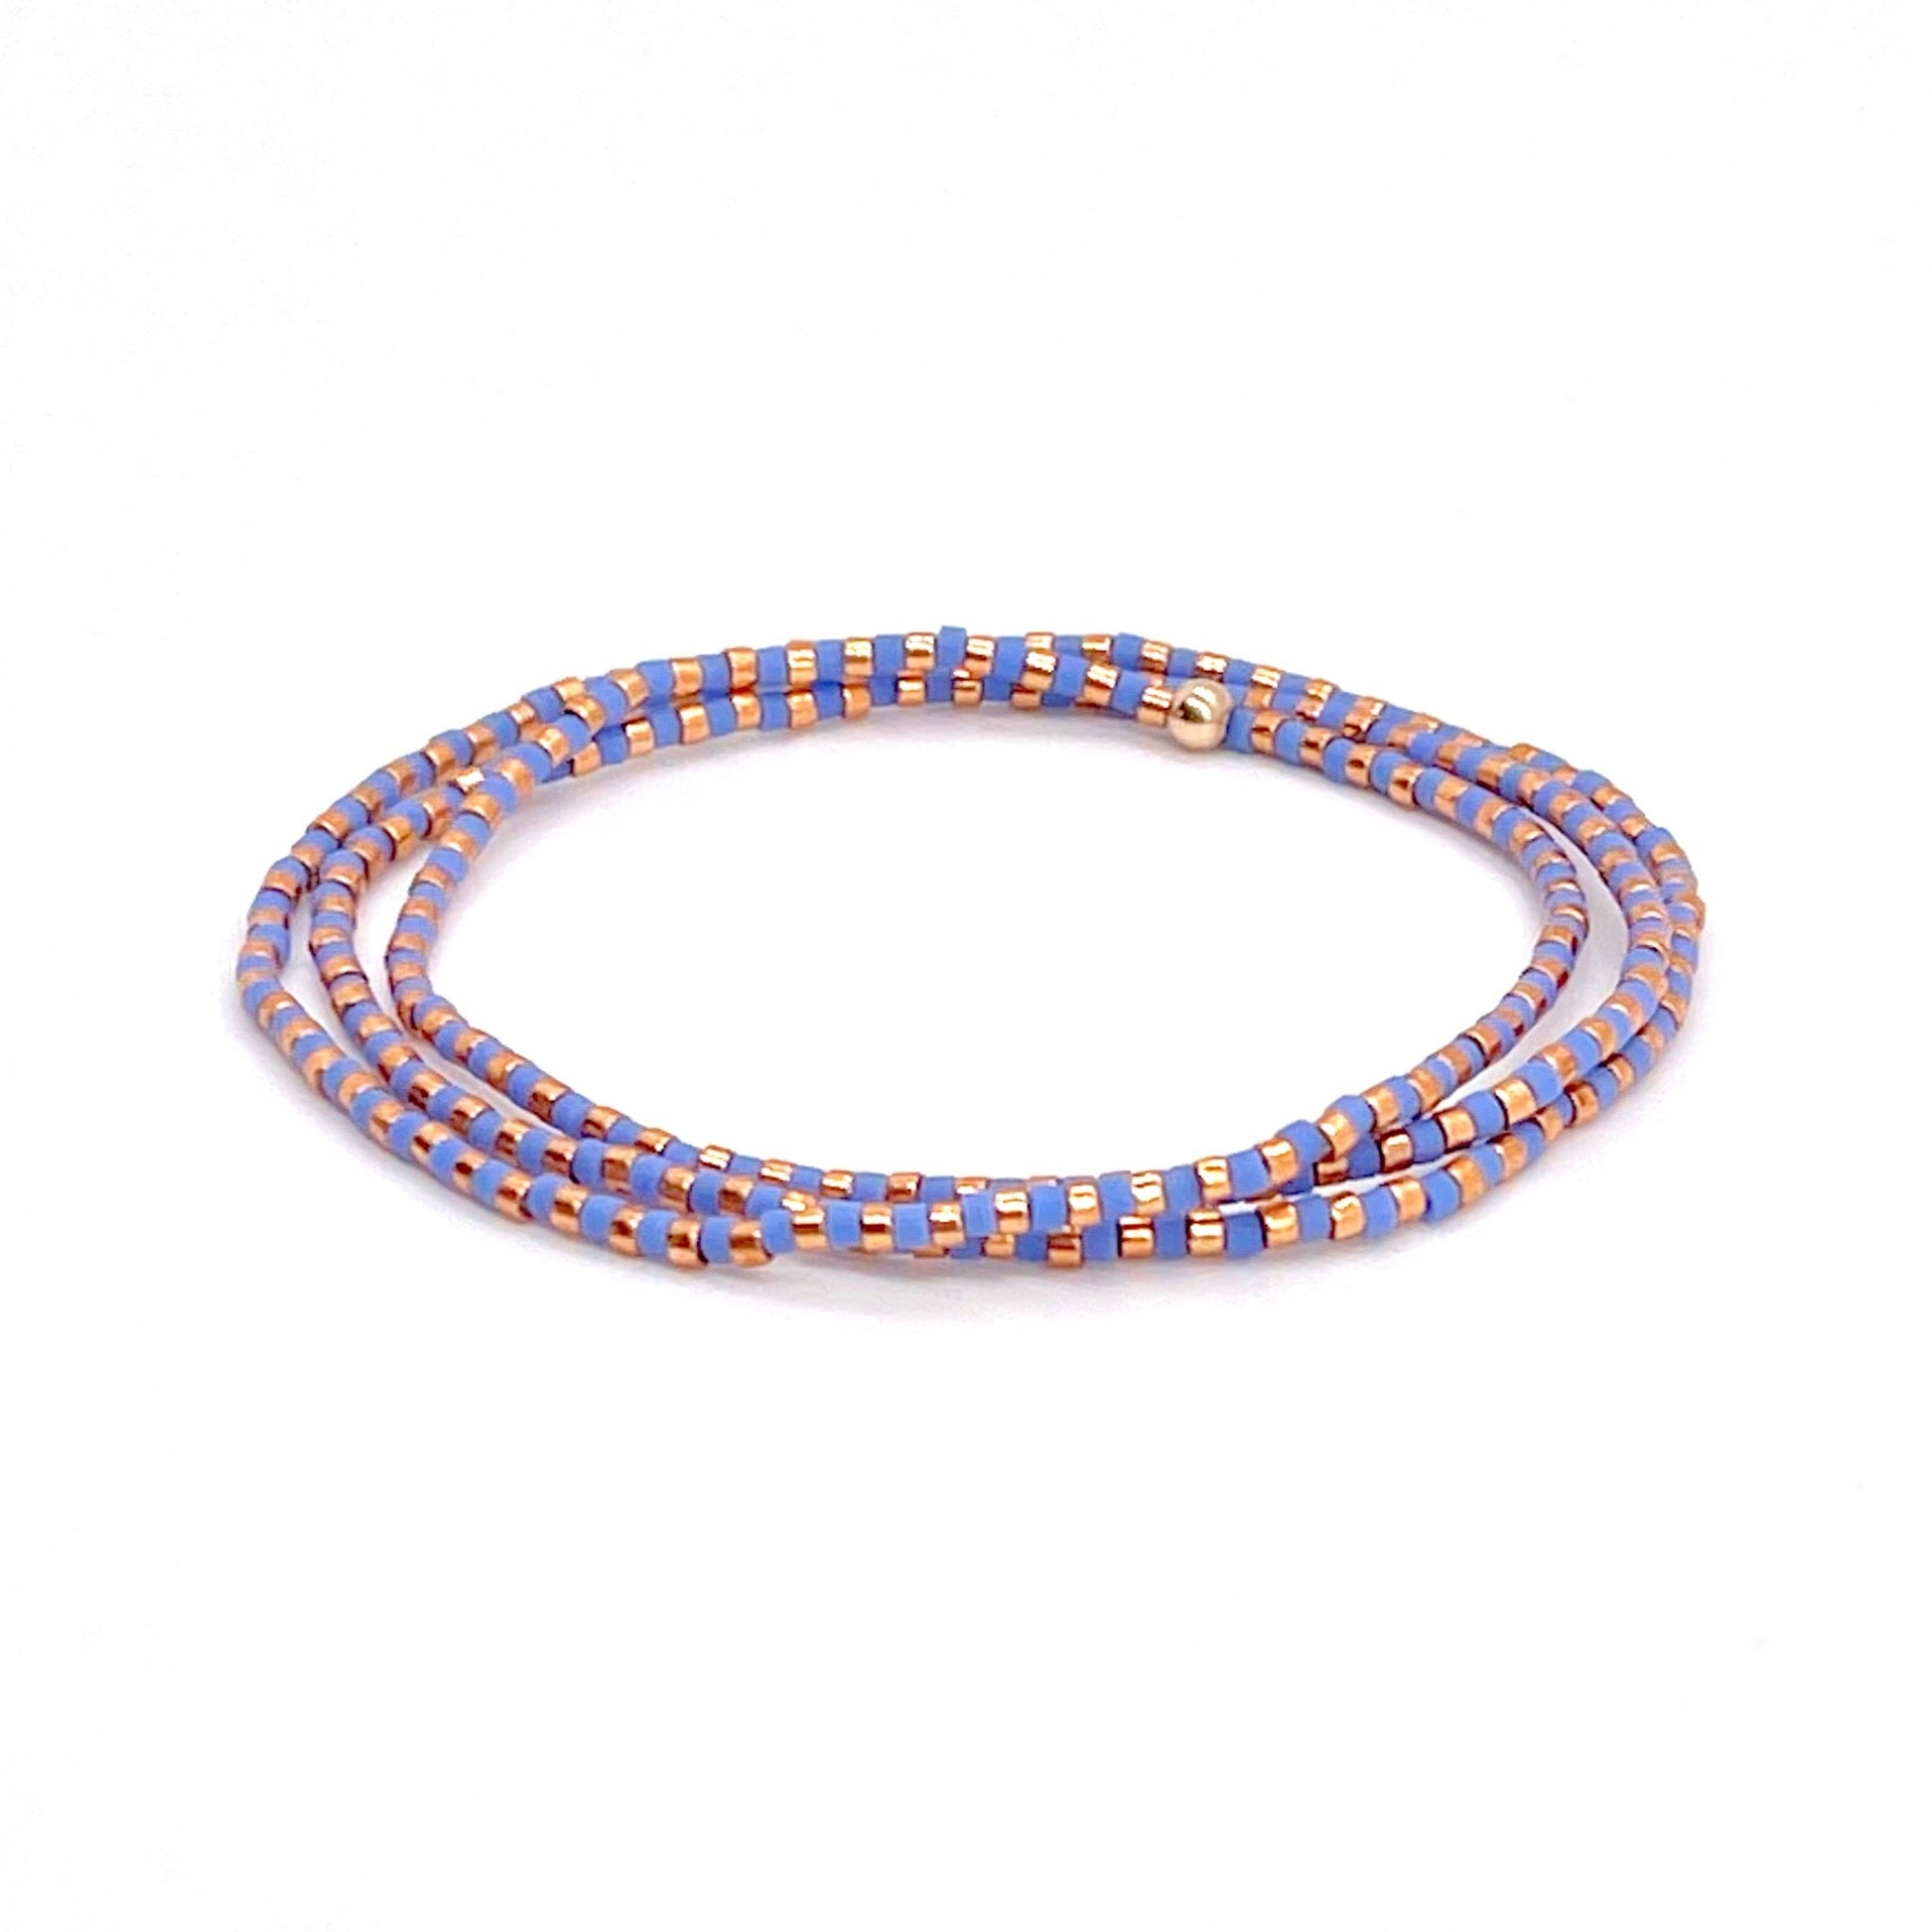 Beaded wrap bracelet with periwinkle blue and rose gold-tone seed beads on stretch cord.